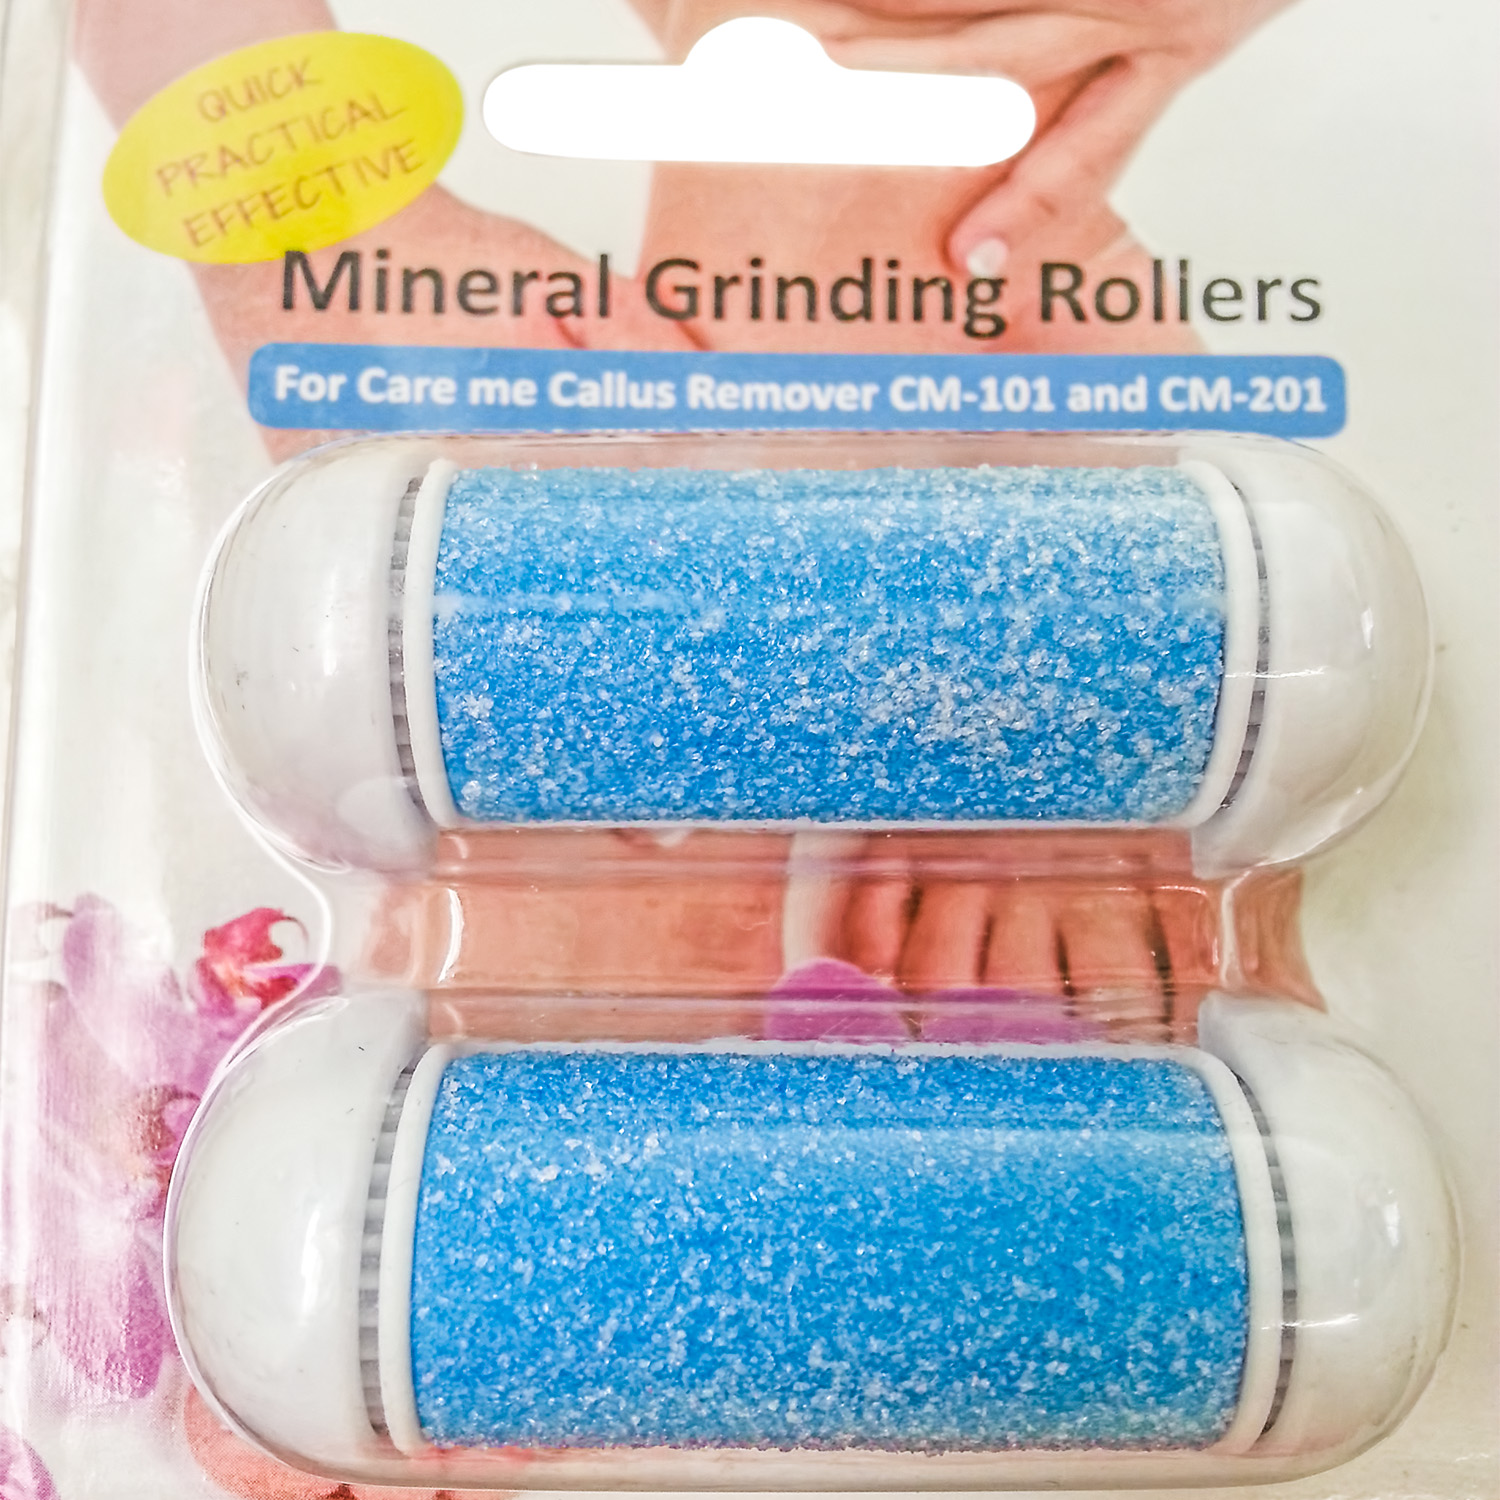 Coarse Refill Rollers for Care me Callus Remover CM-201 & 101 (a pack of 2)